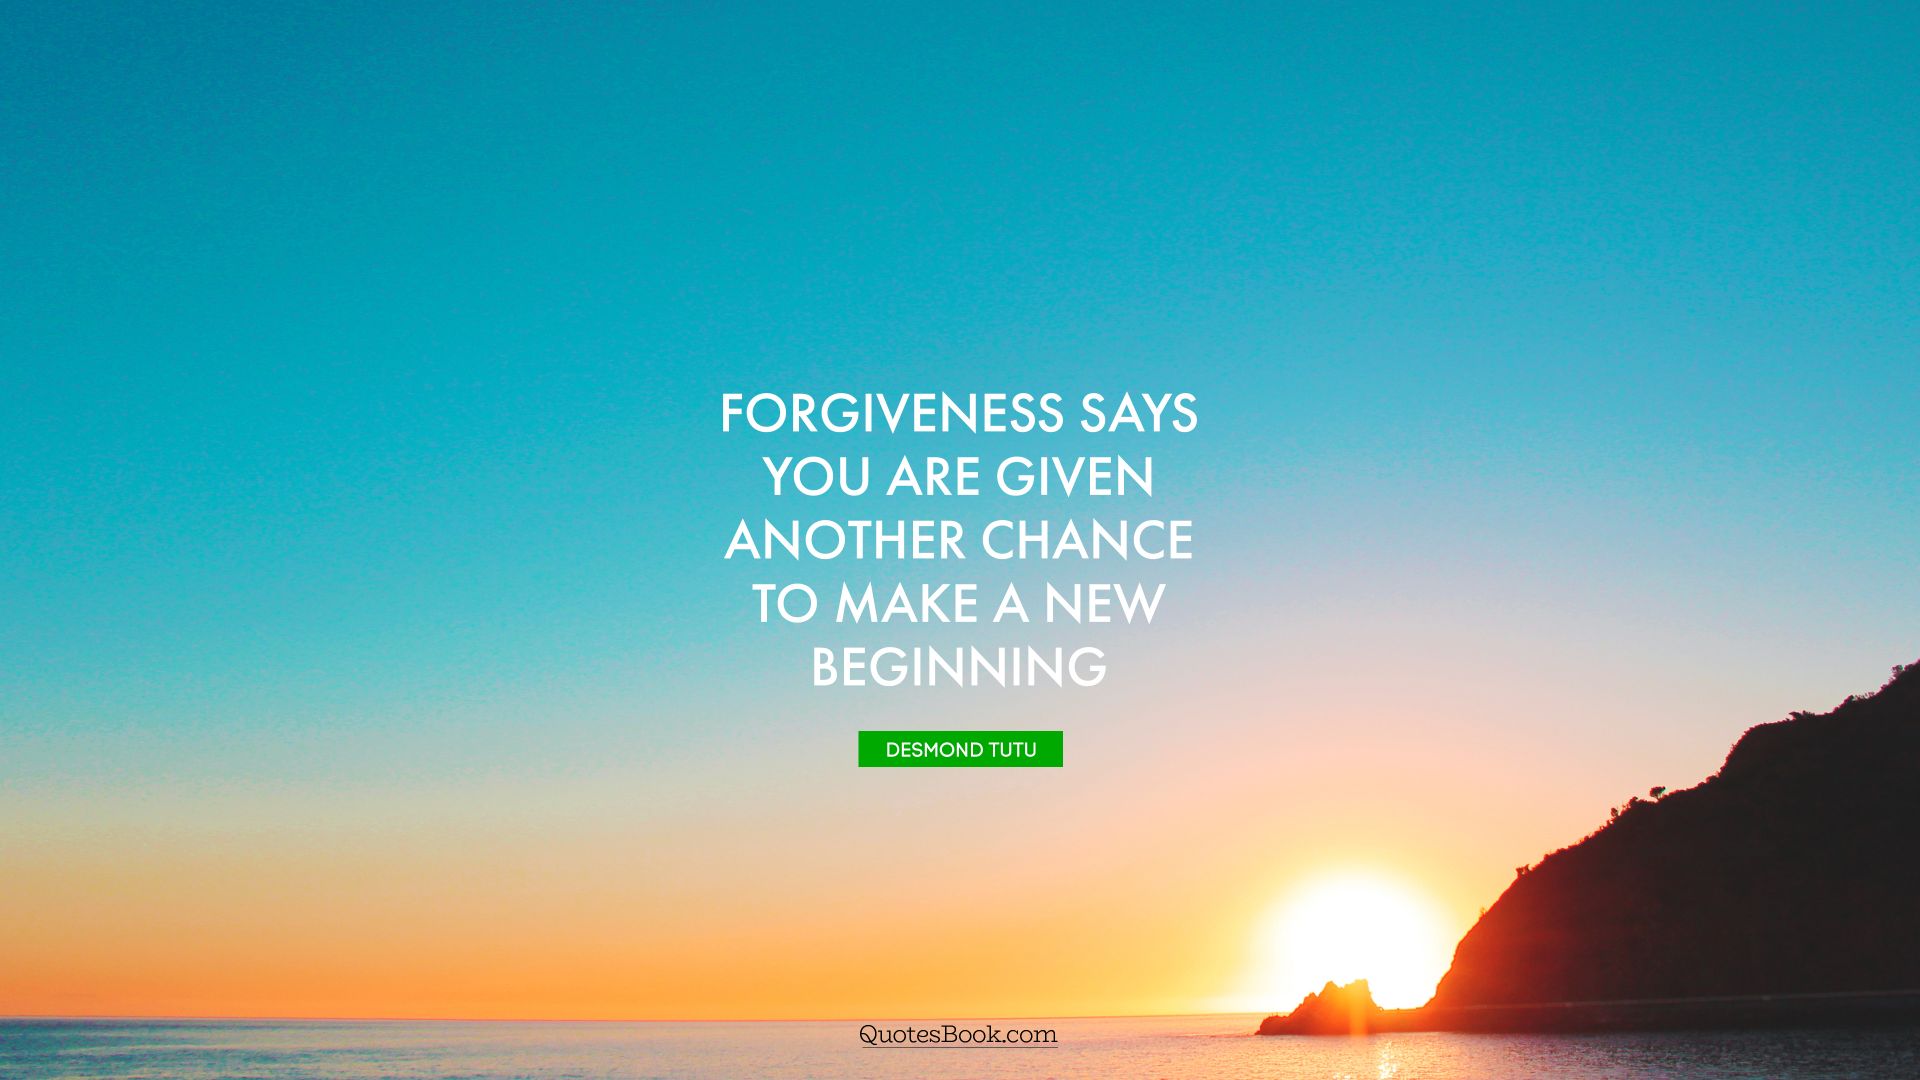 Forgiveness says you are given another chance to make a new beginning. - Quote by Desmond Tutu